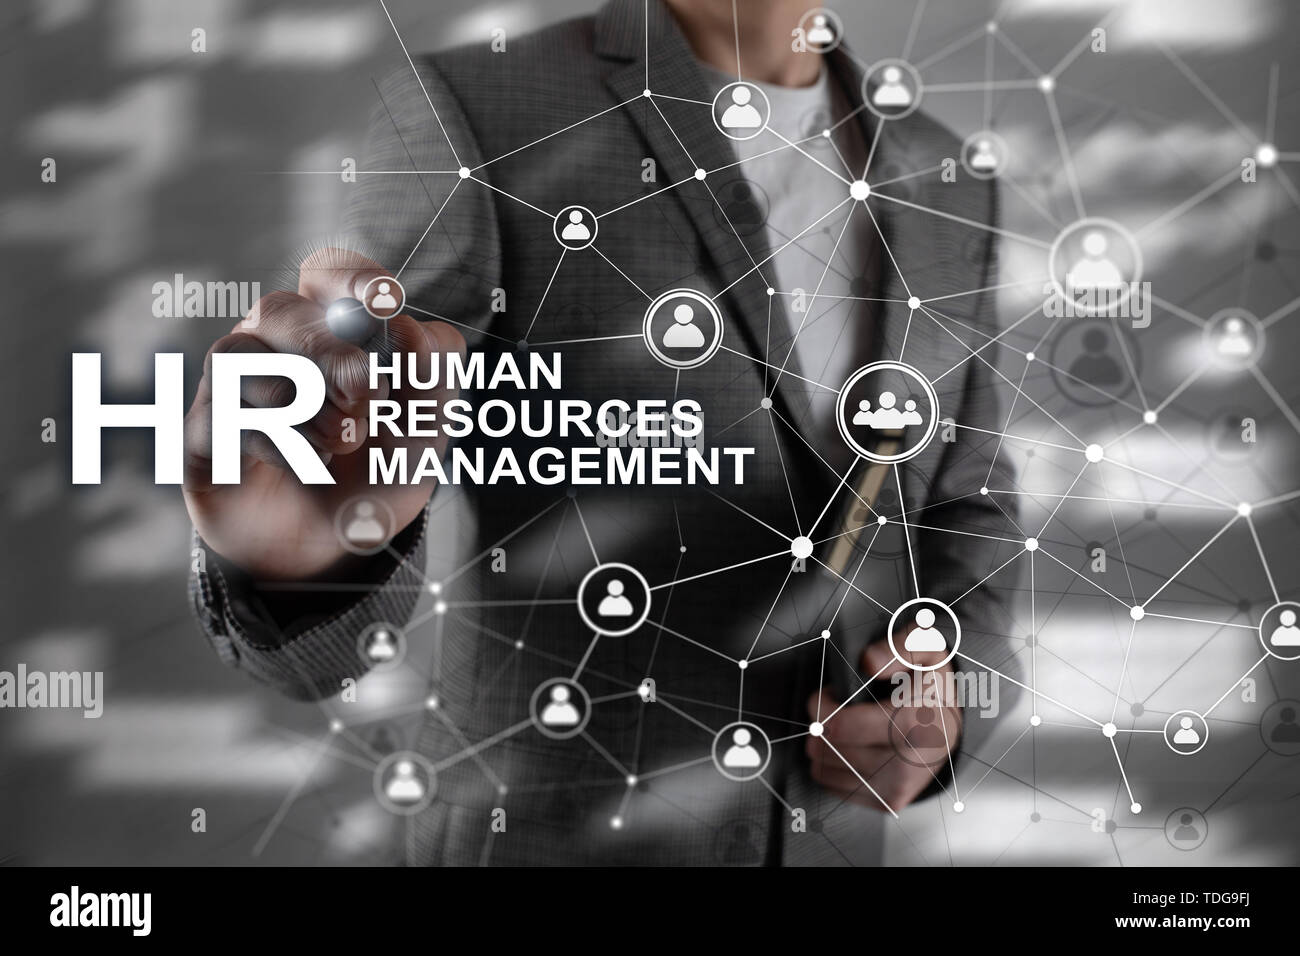 Businessman pointing on HRM Human Resource Management  sign Stock Photo  by kritchanut 84785524